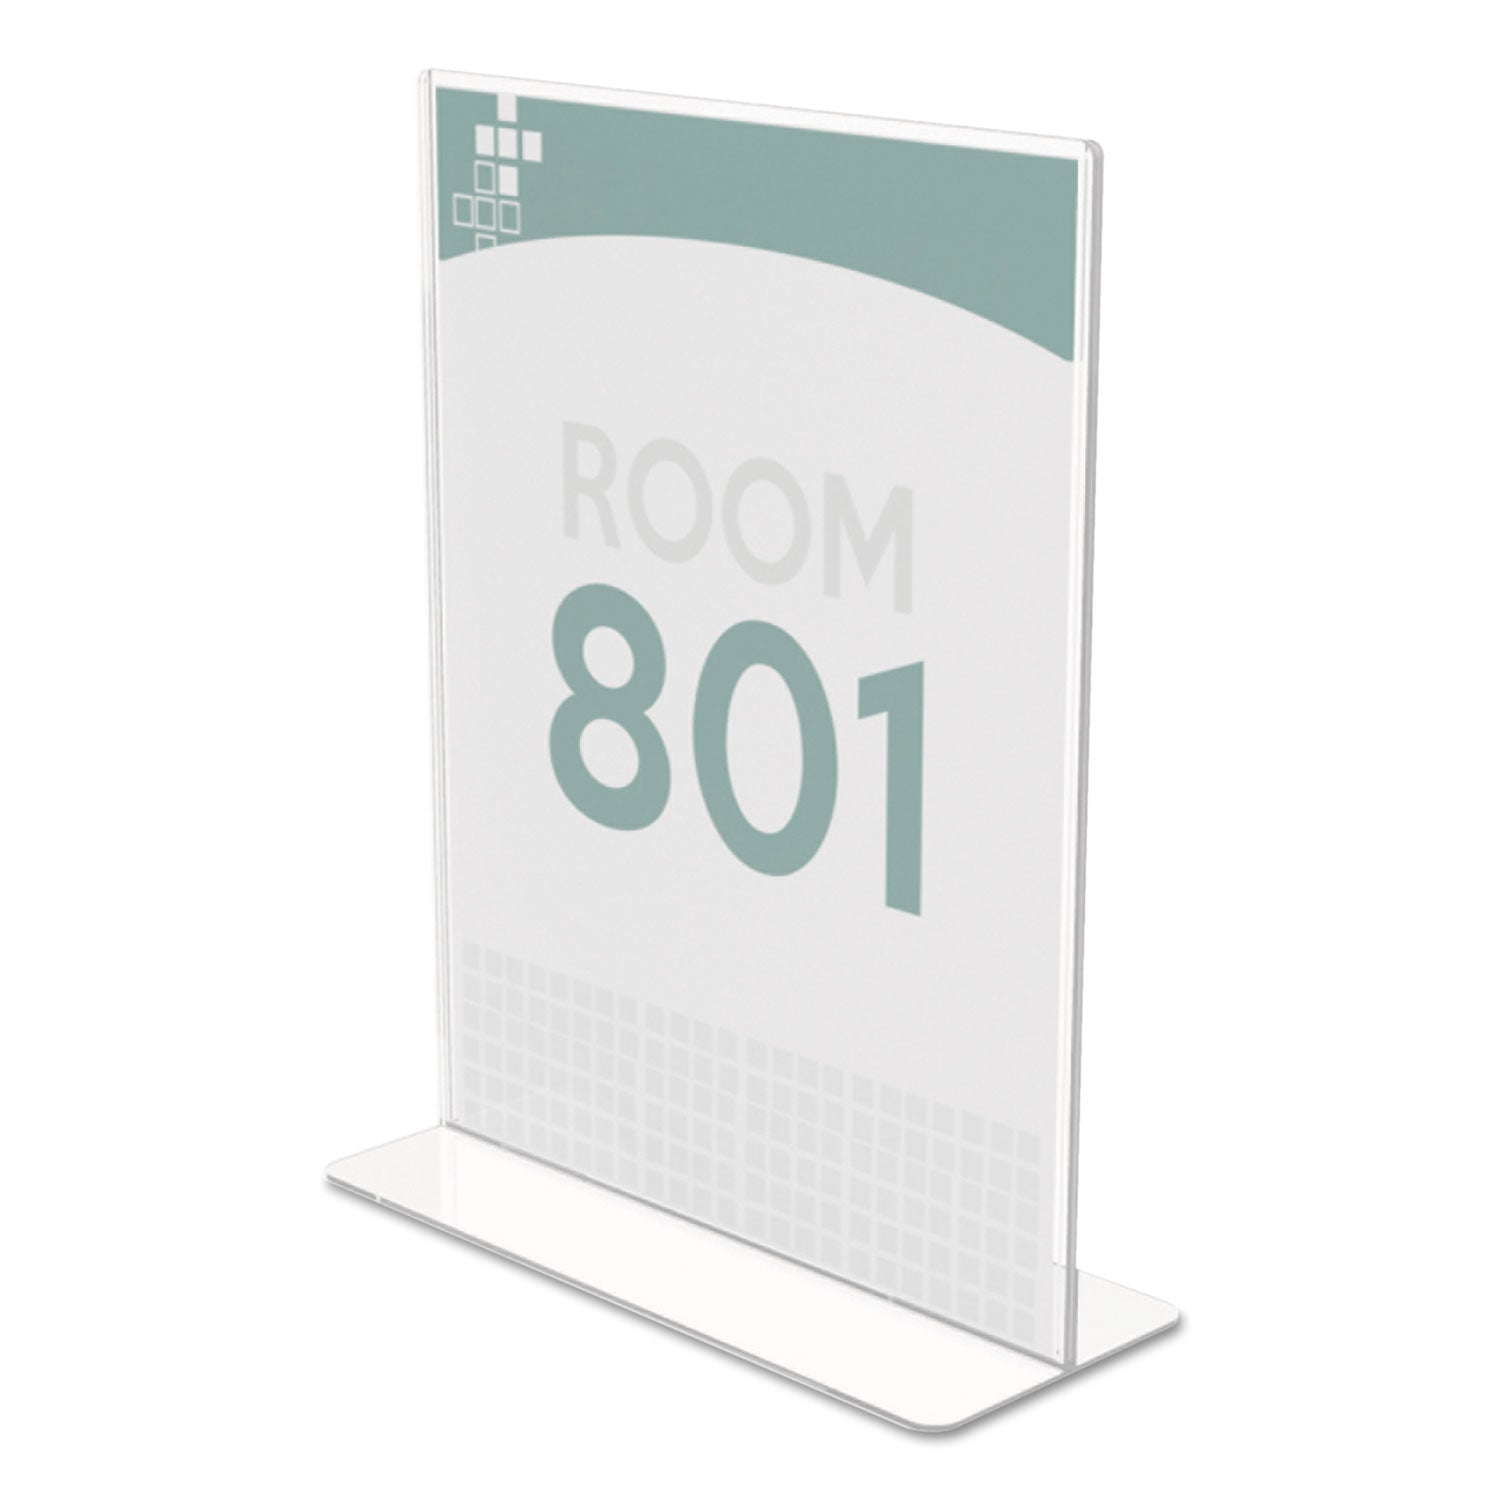 Superior Image Double Sided Sign Holder, 8.5 x 11 Insert, Clear - 